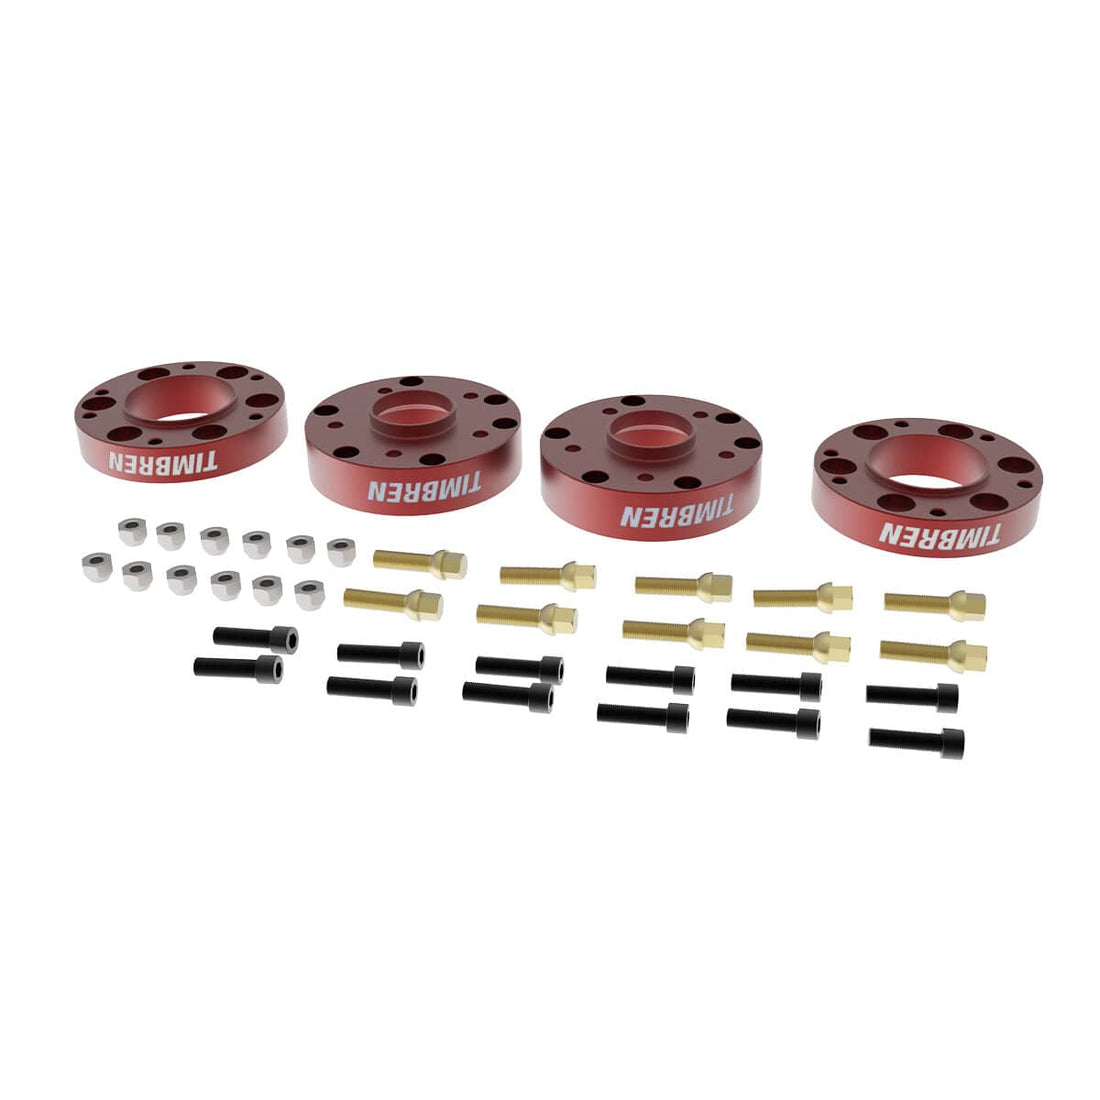 Axle-Less Wheel Adapter Kit for Jeep